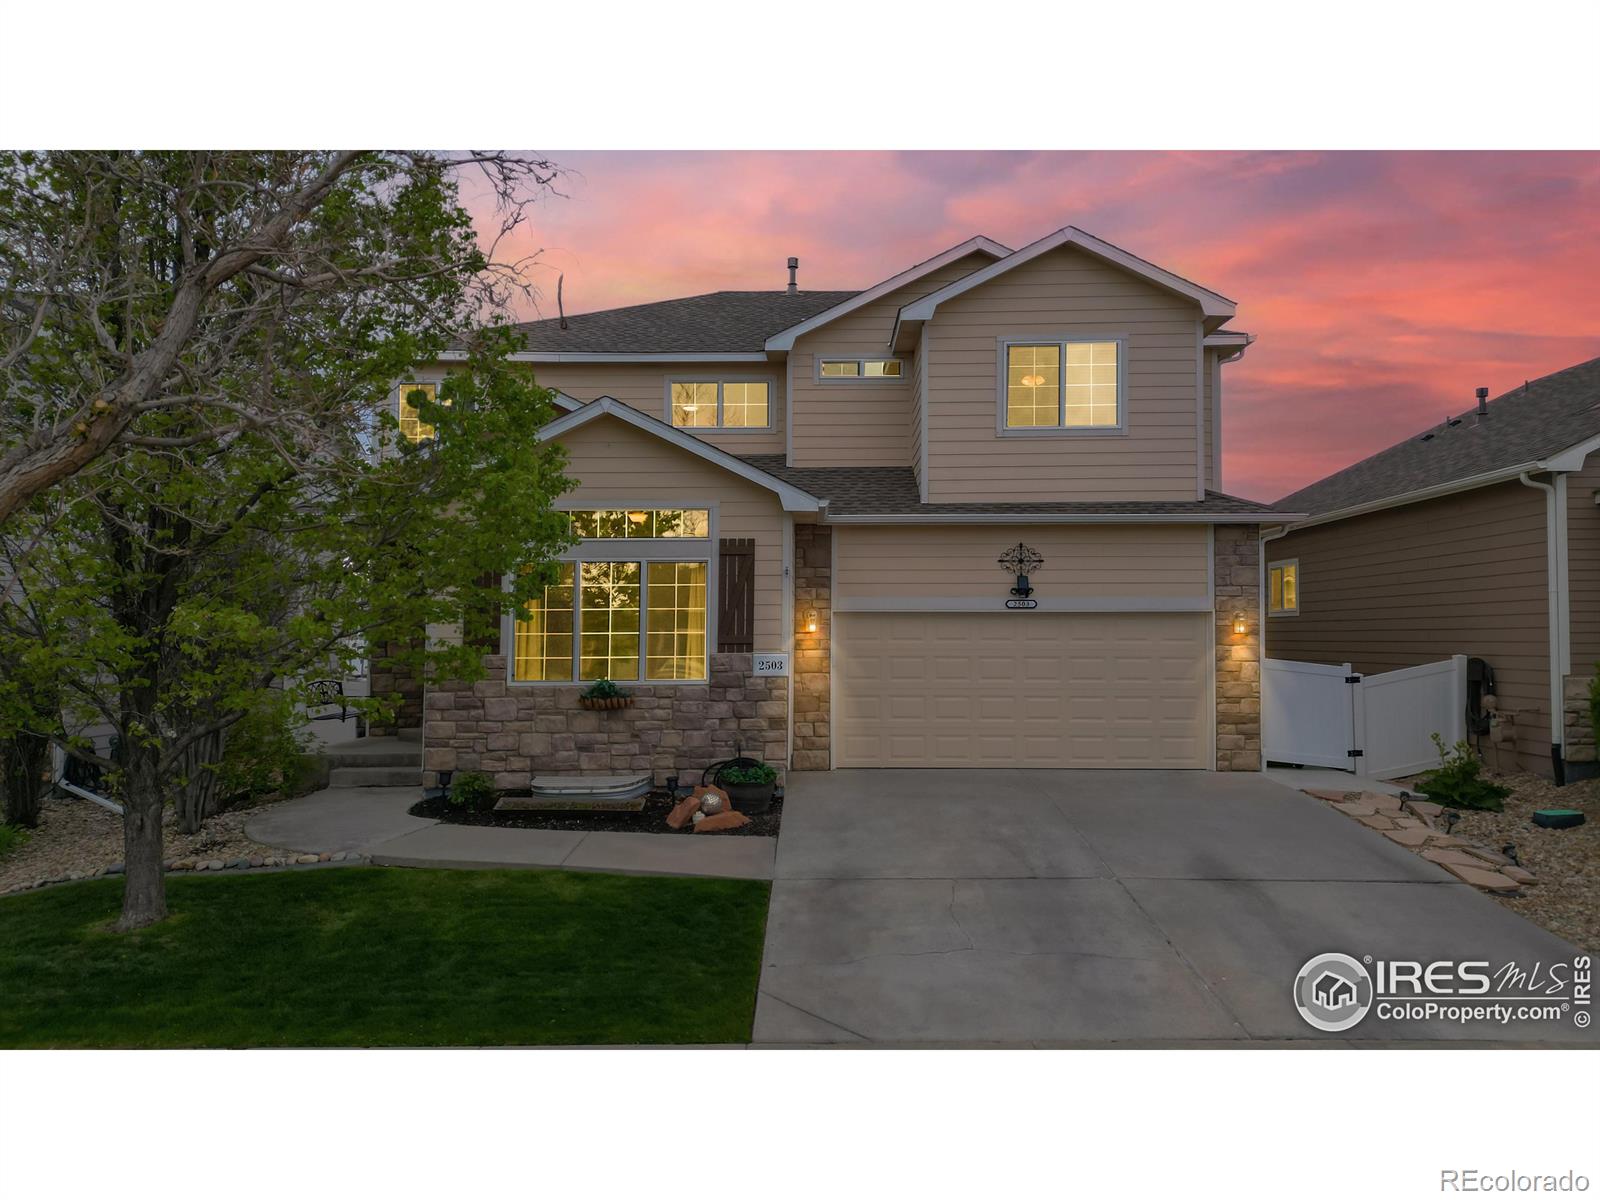 Report Image for 2503  Thoreau Drive,Fort Collins, Colorado